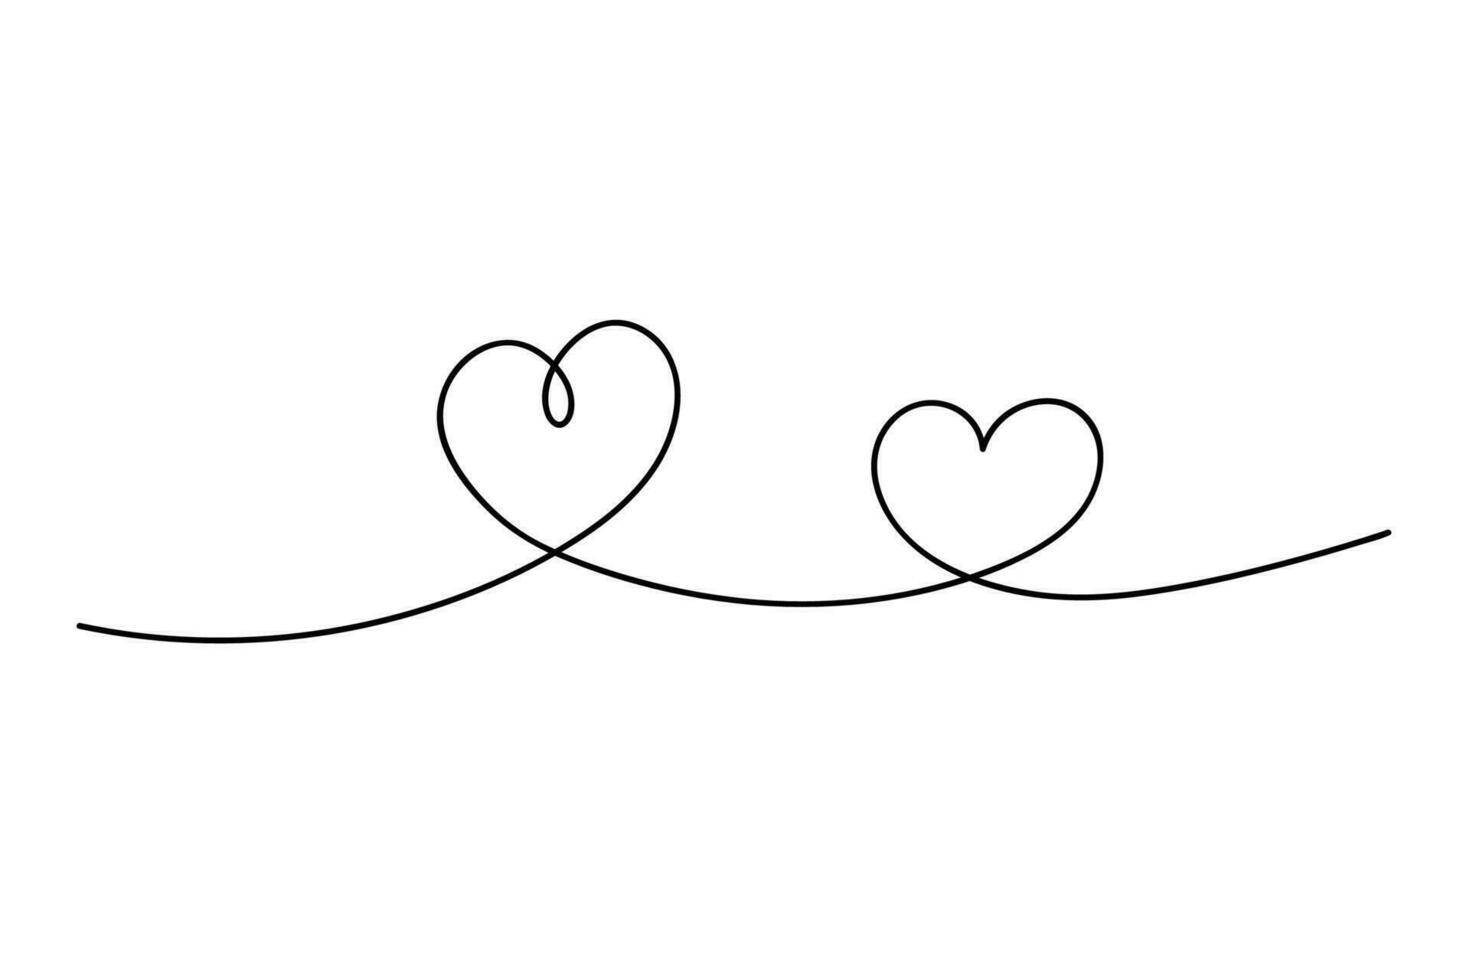 Continuous line drawing. Heart with black line. Editable stroke vector